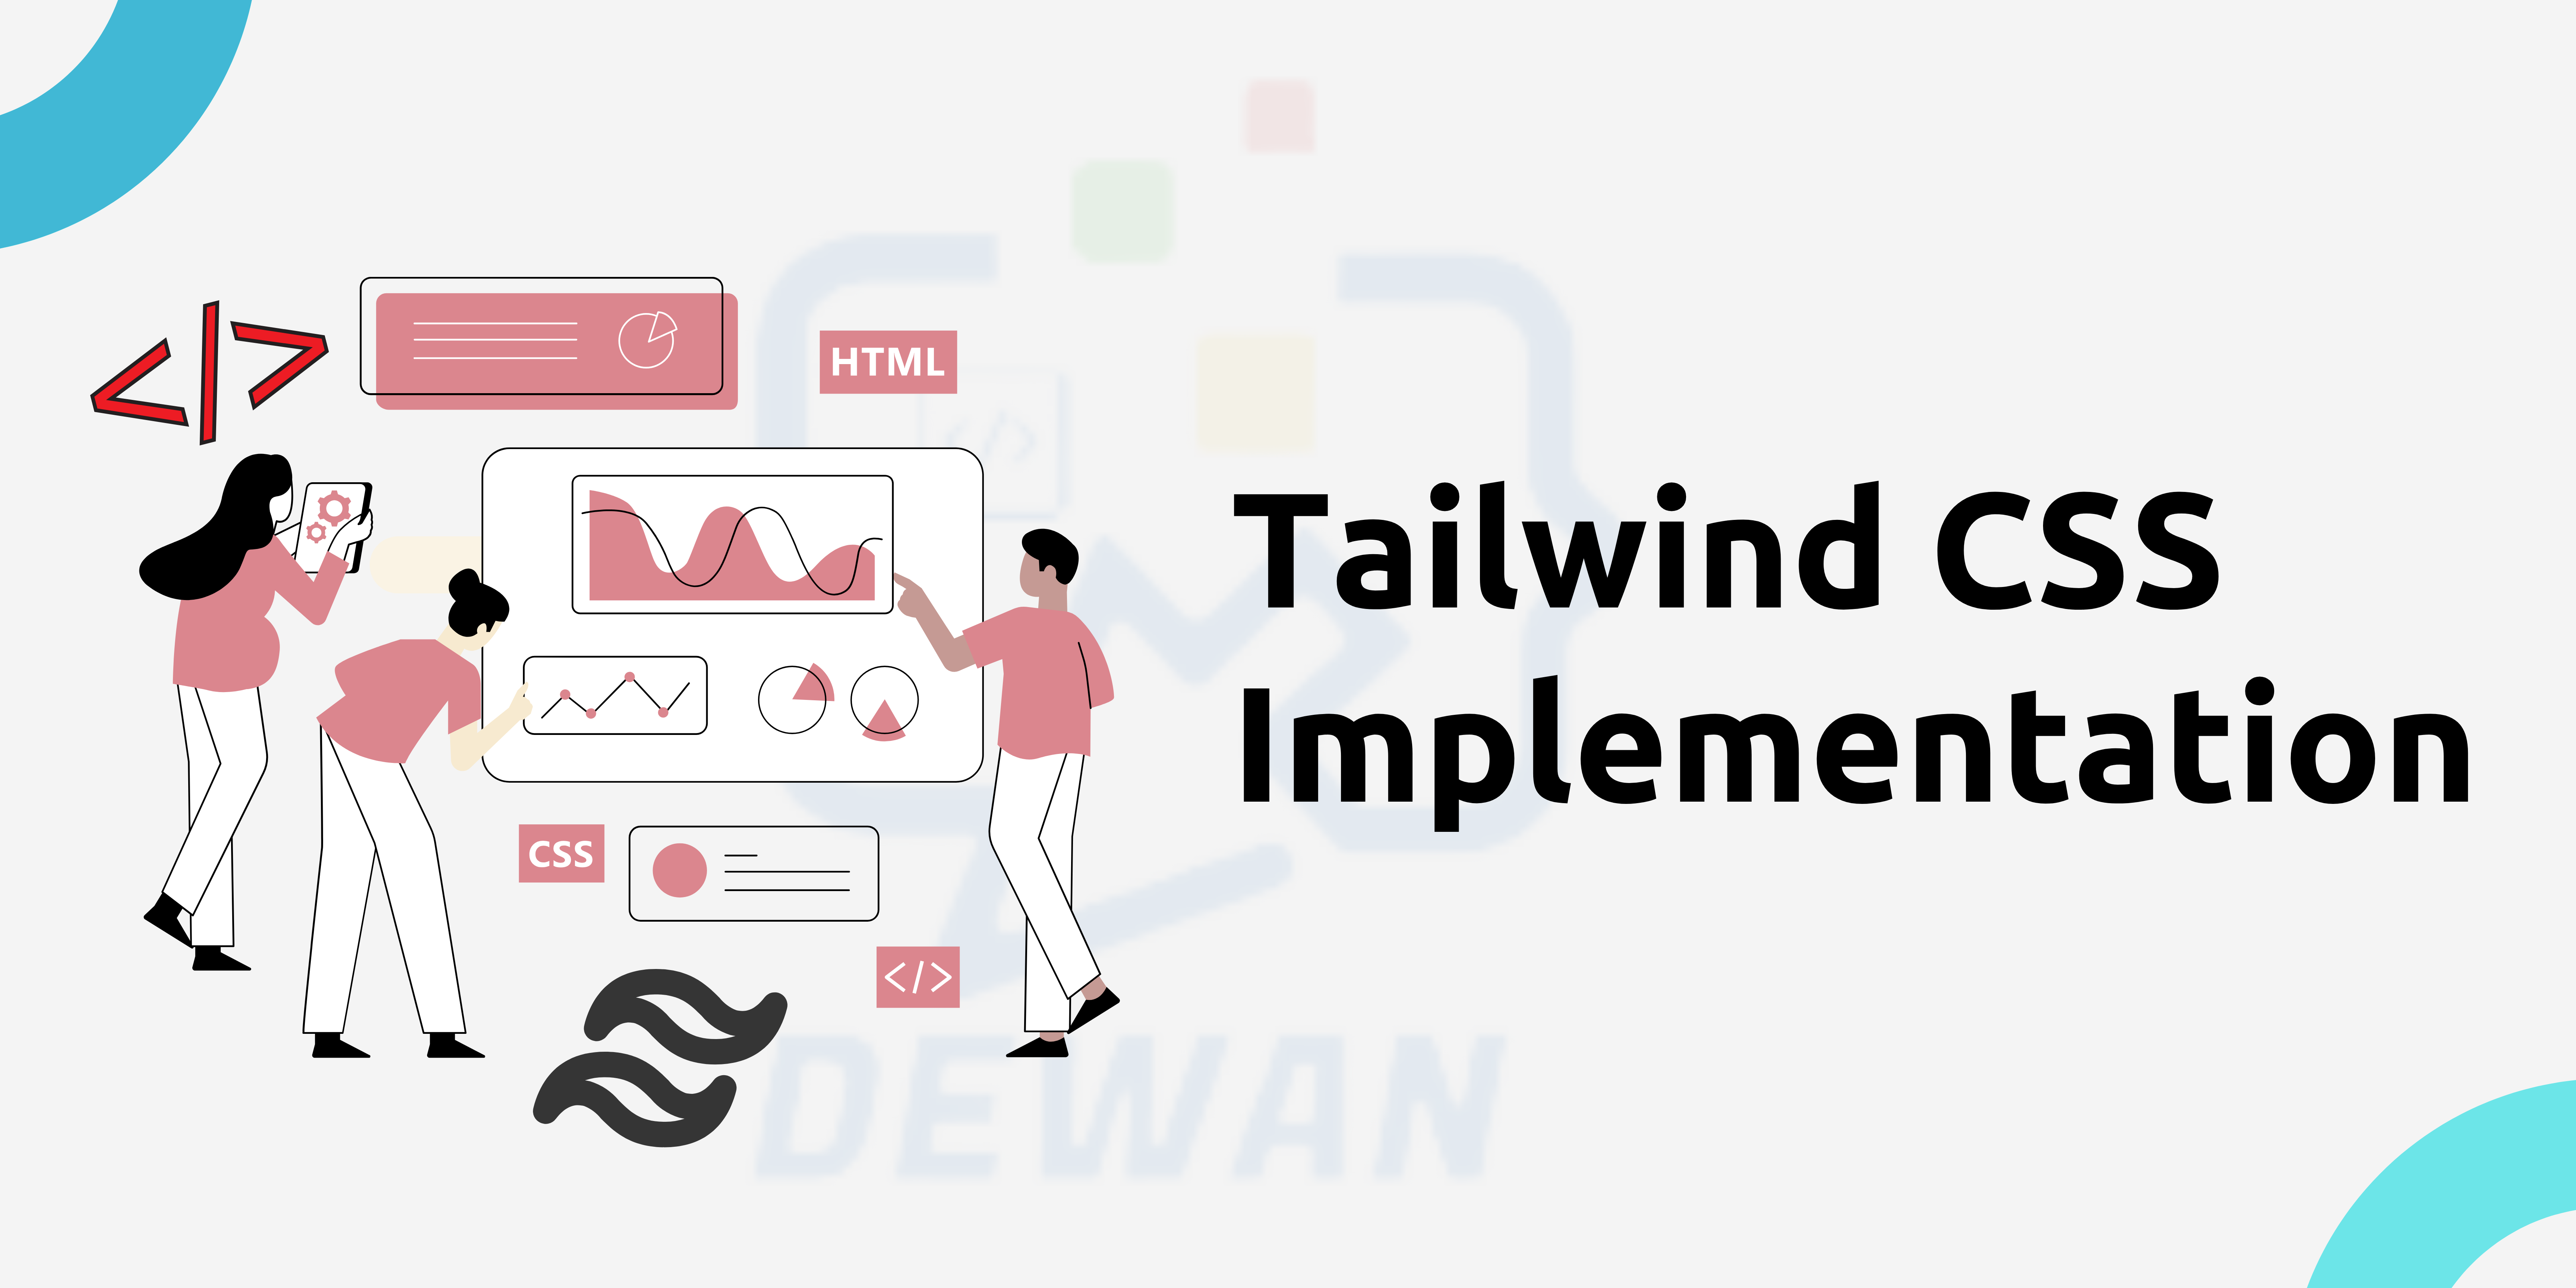 Tailwind CSS Implementation